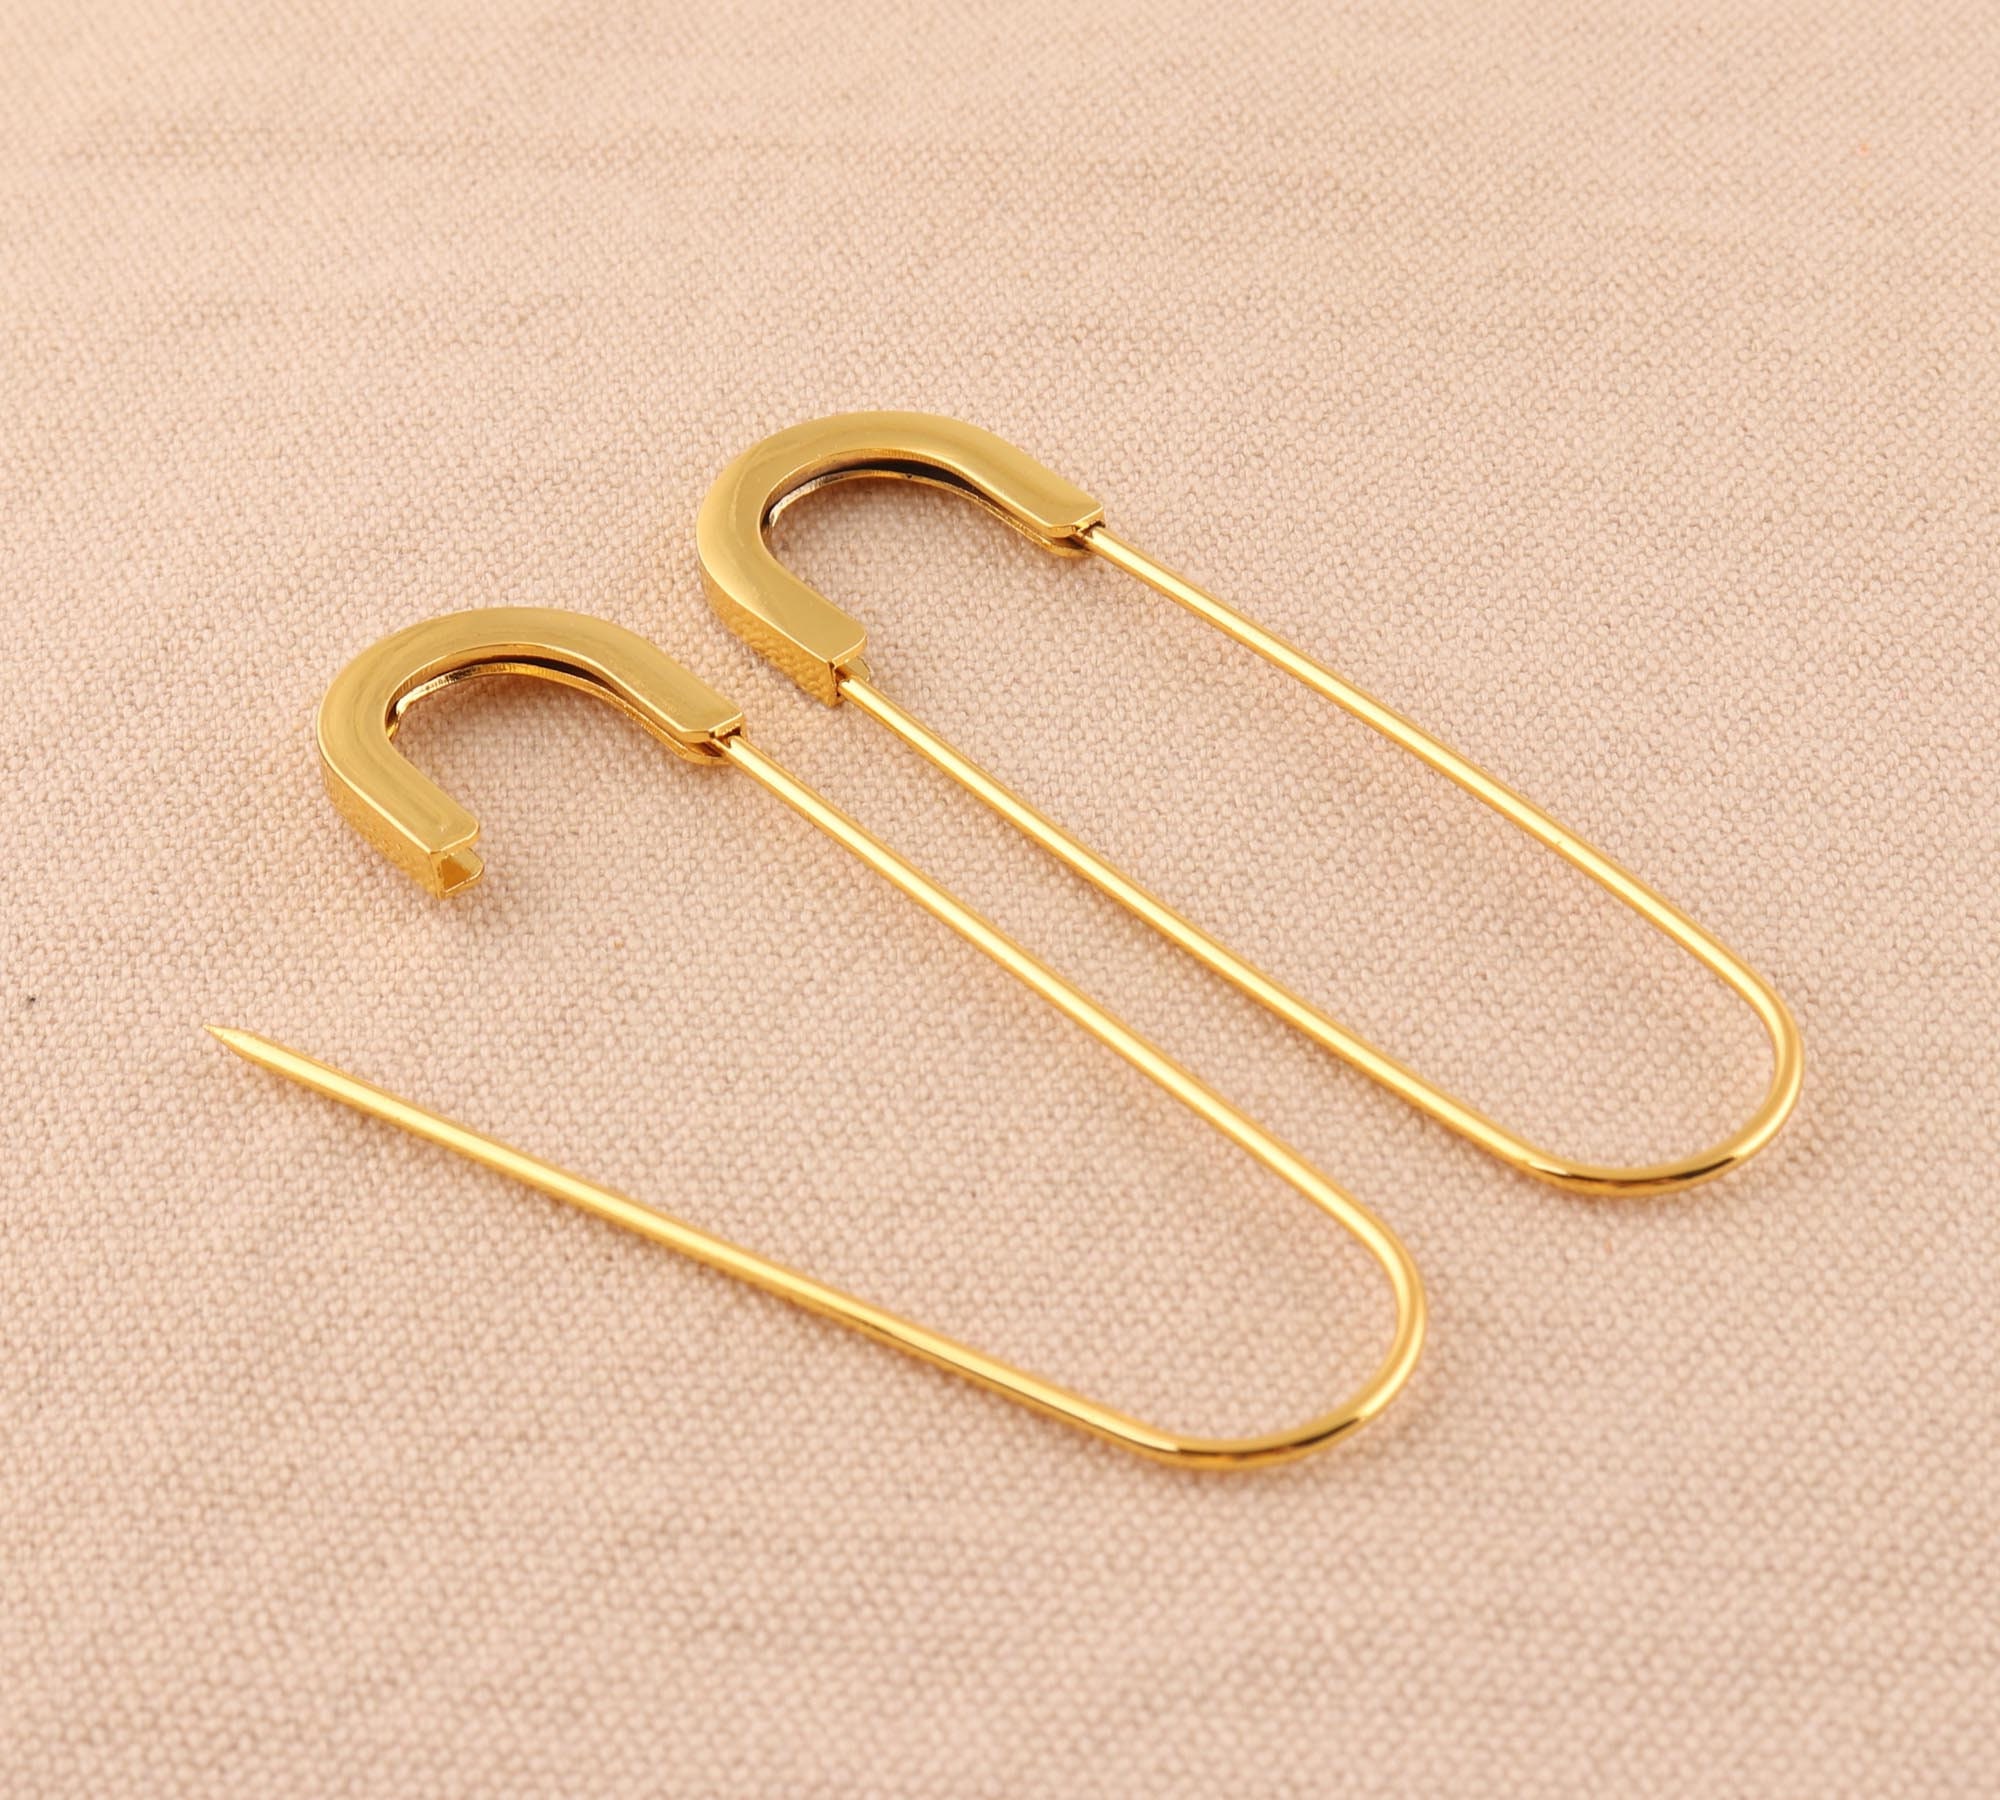 Louis Vuitton Safety Pin Brooch - Gold-Tone Metal Pin, Brooches - LOU39202